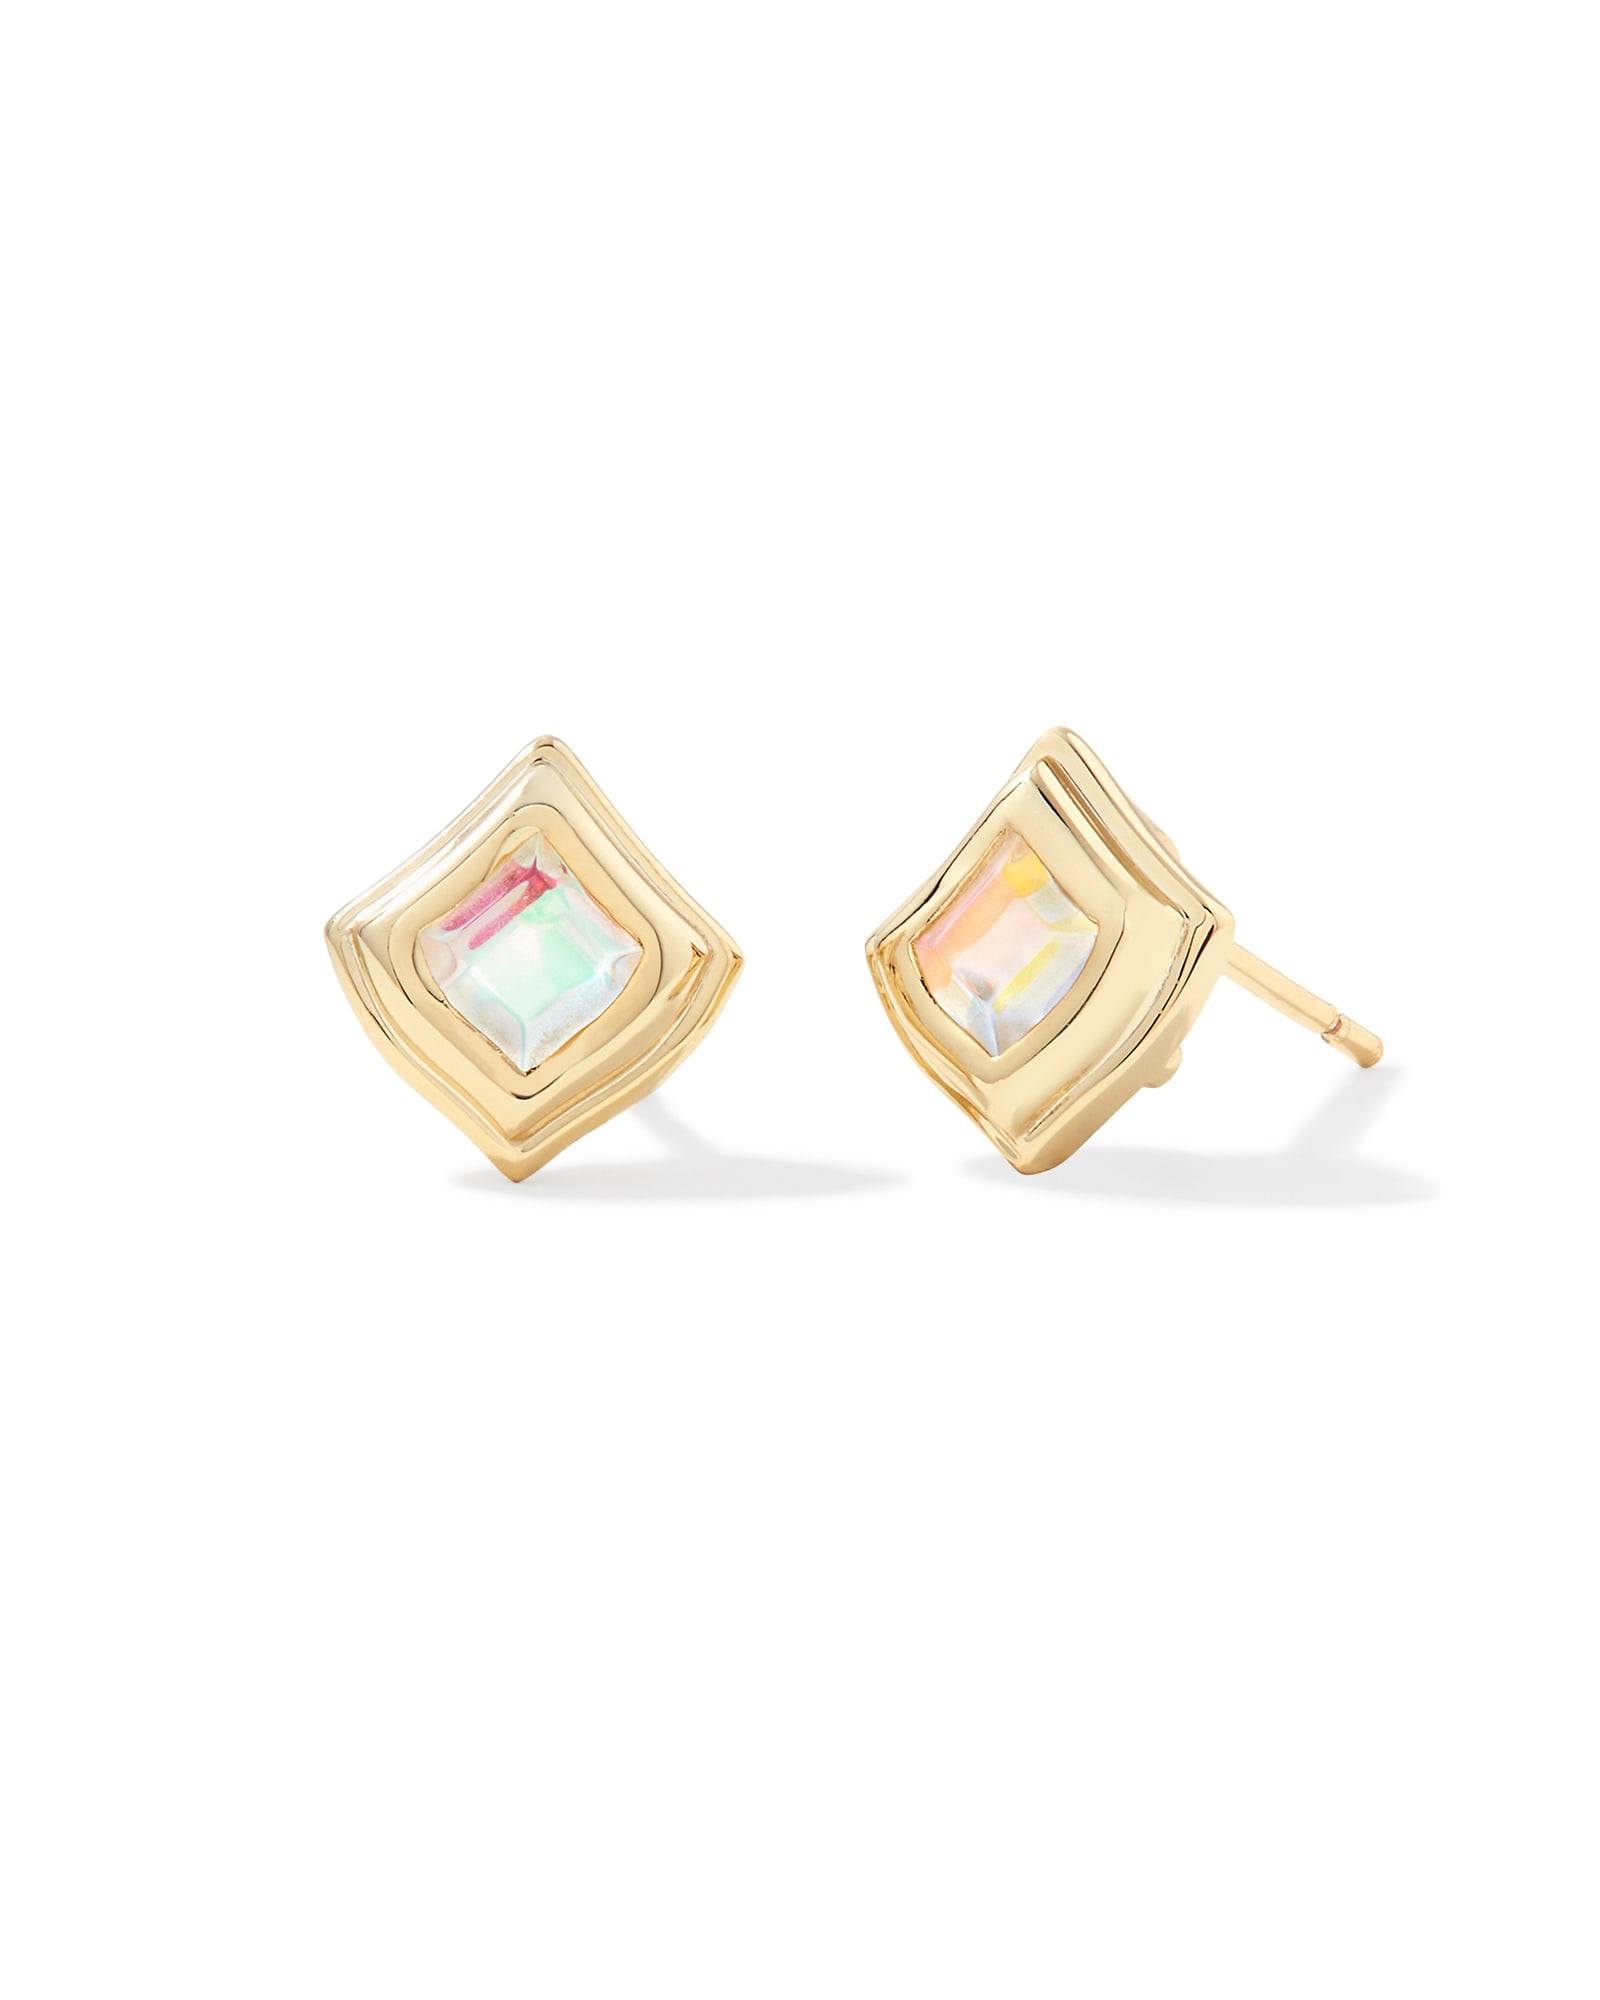 Kacey Gold Stud Earrings in Dichroic Glass